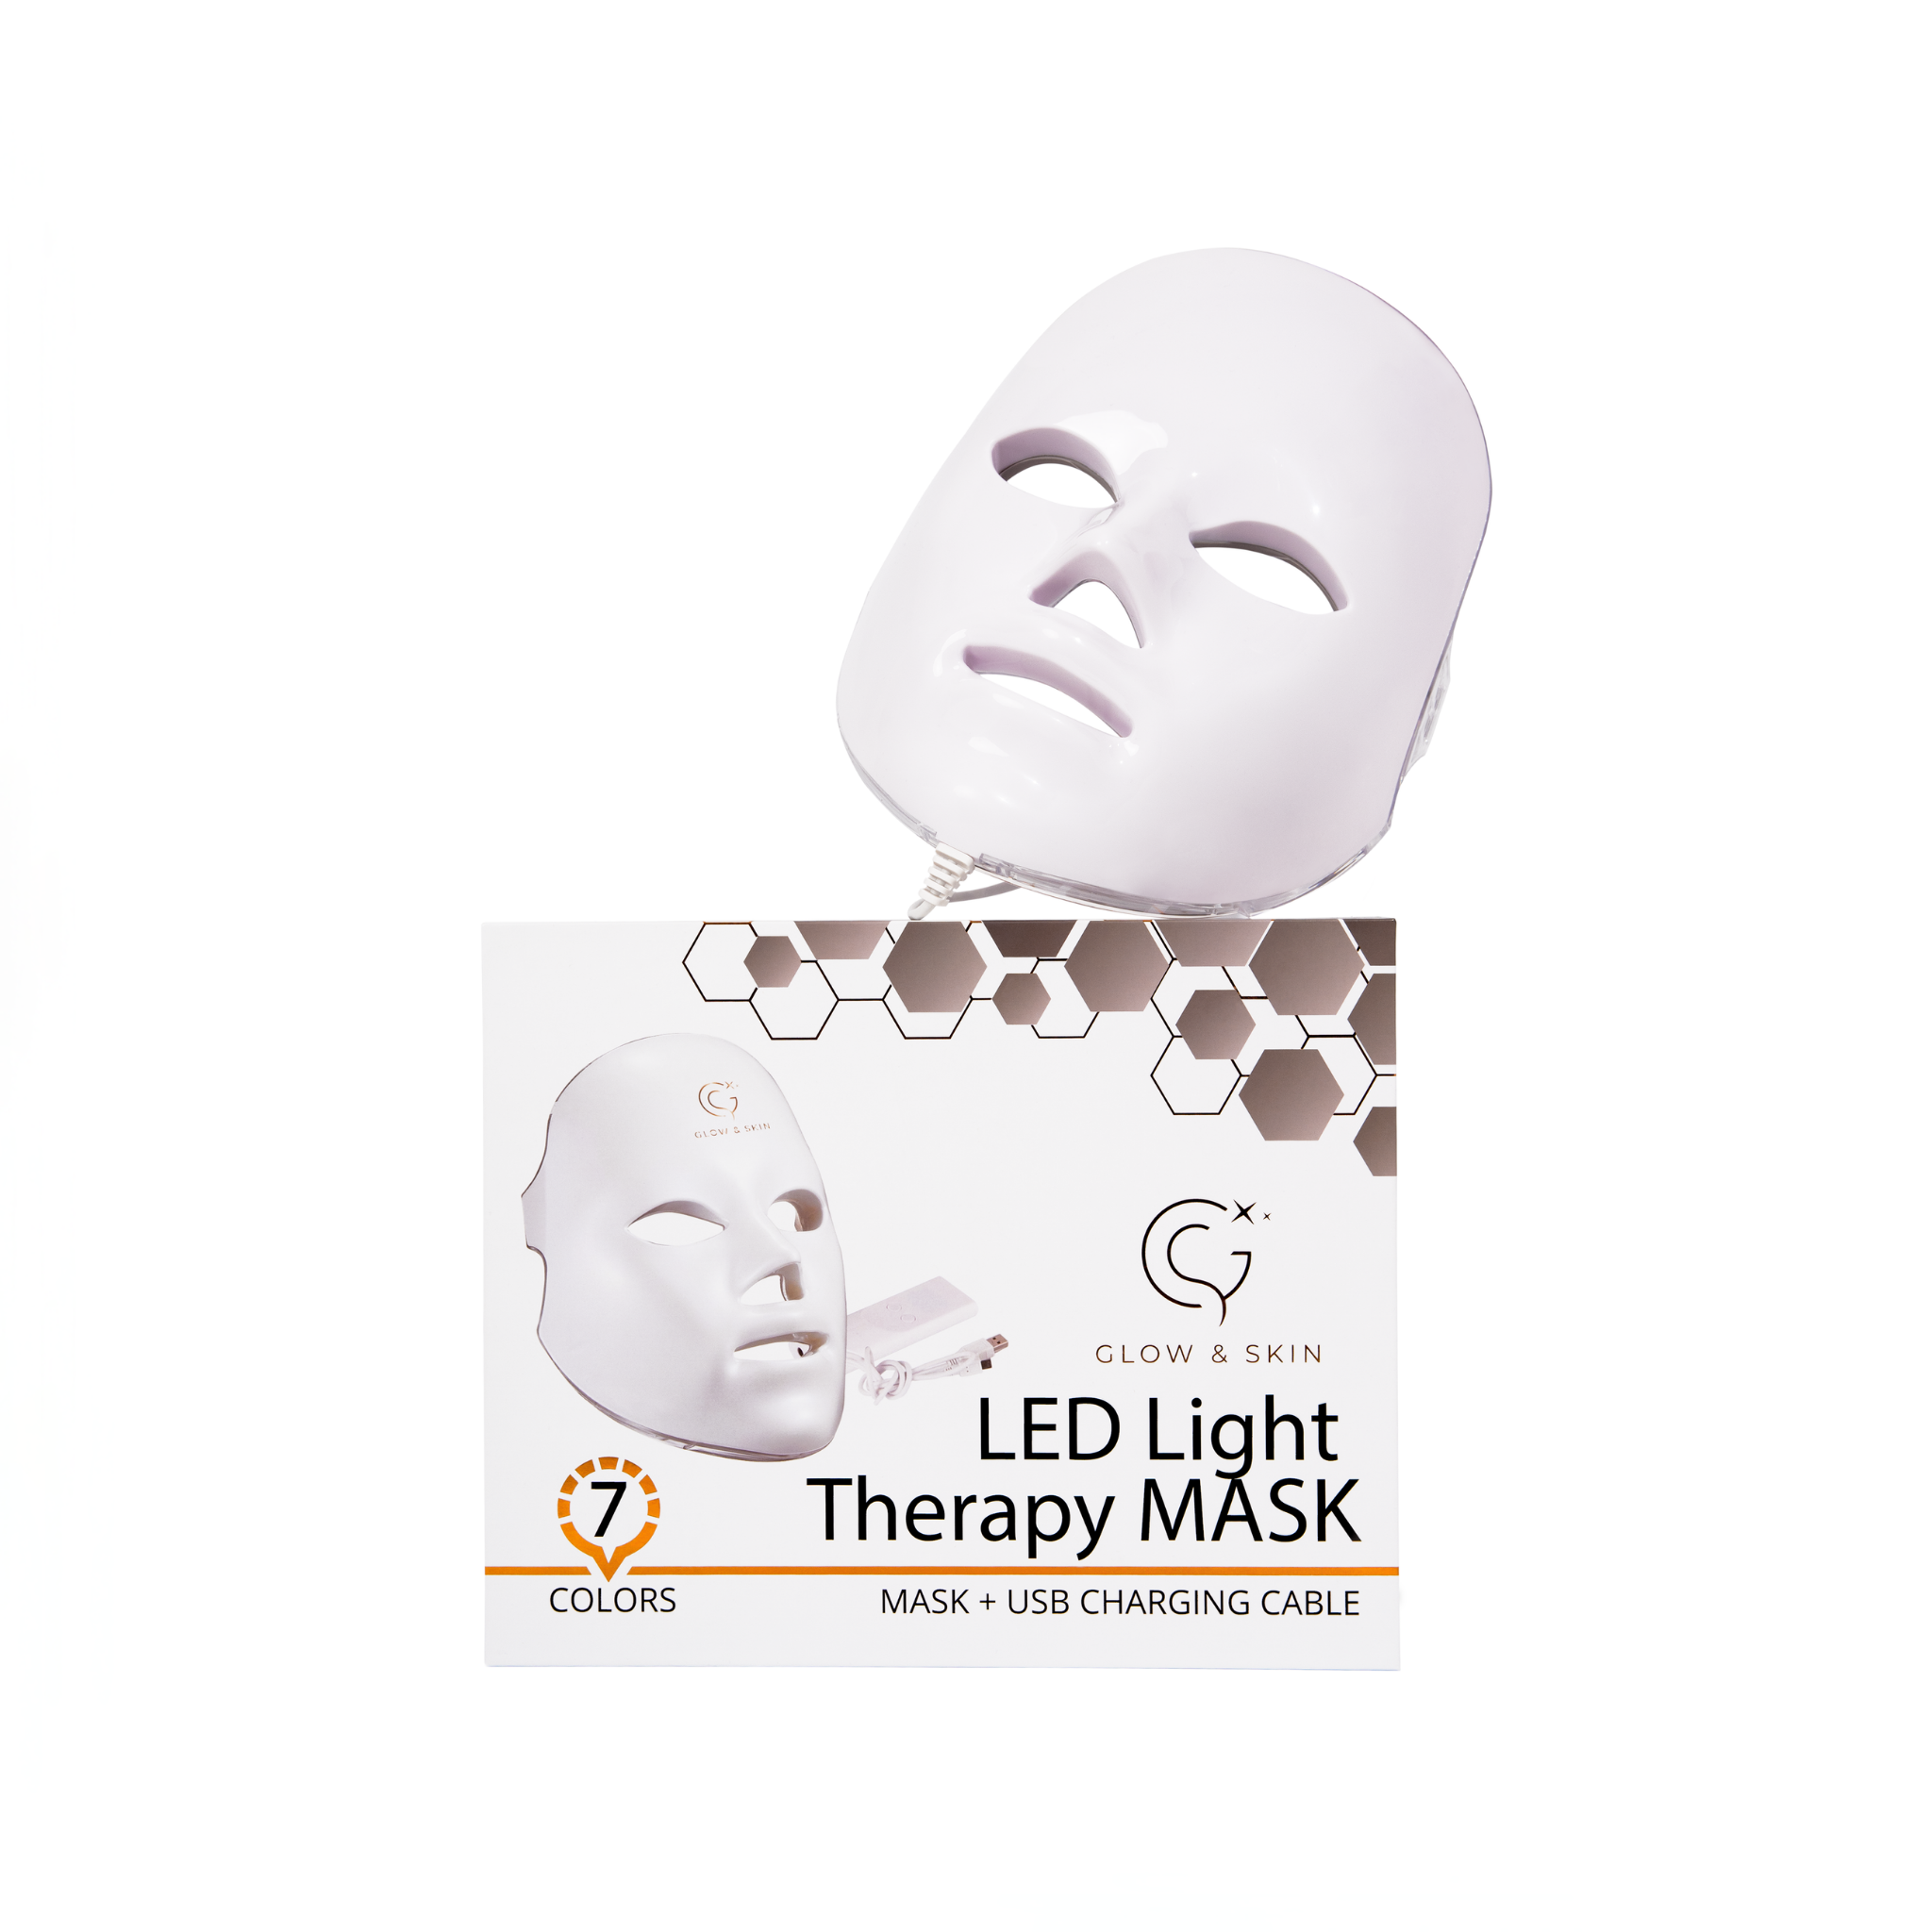 Led light therapy mask